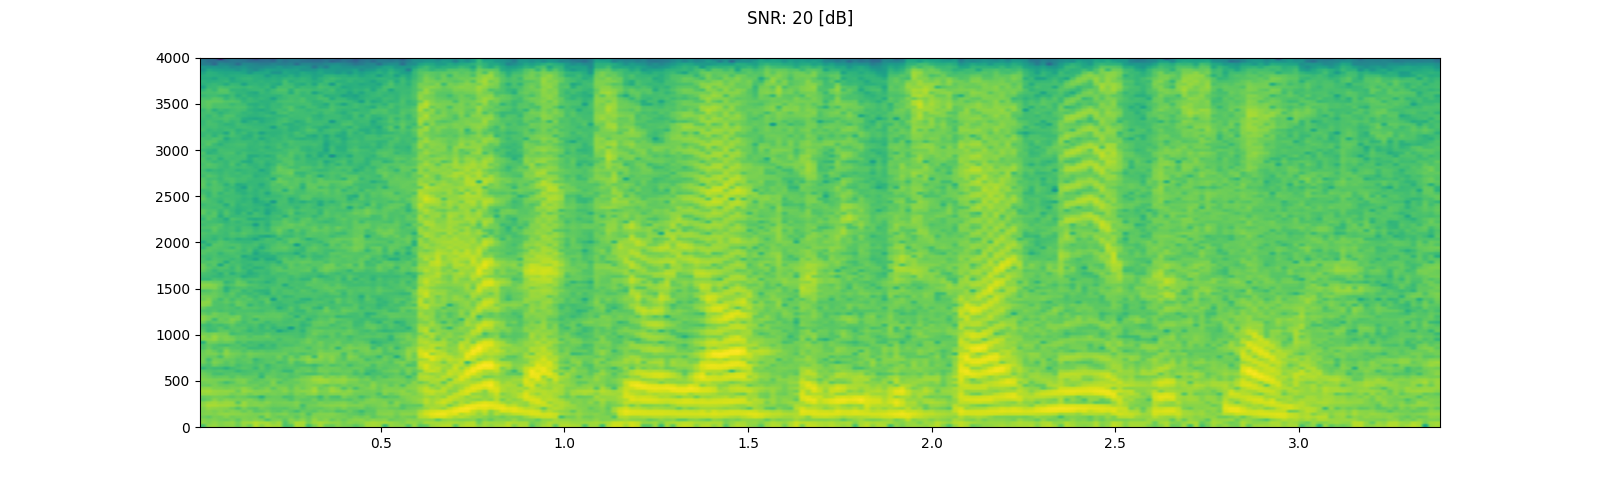 ../_images/sphx_glr_audio_preprocessing_tutorial_032.png